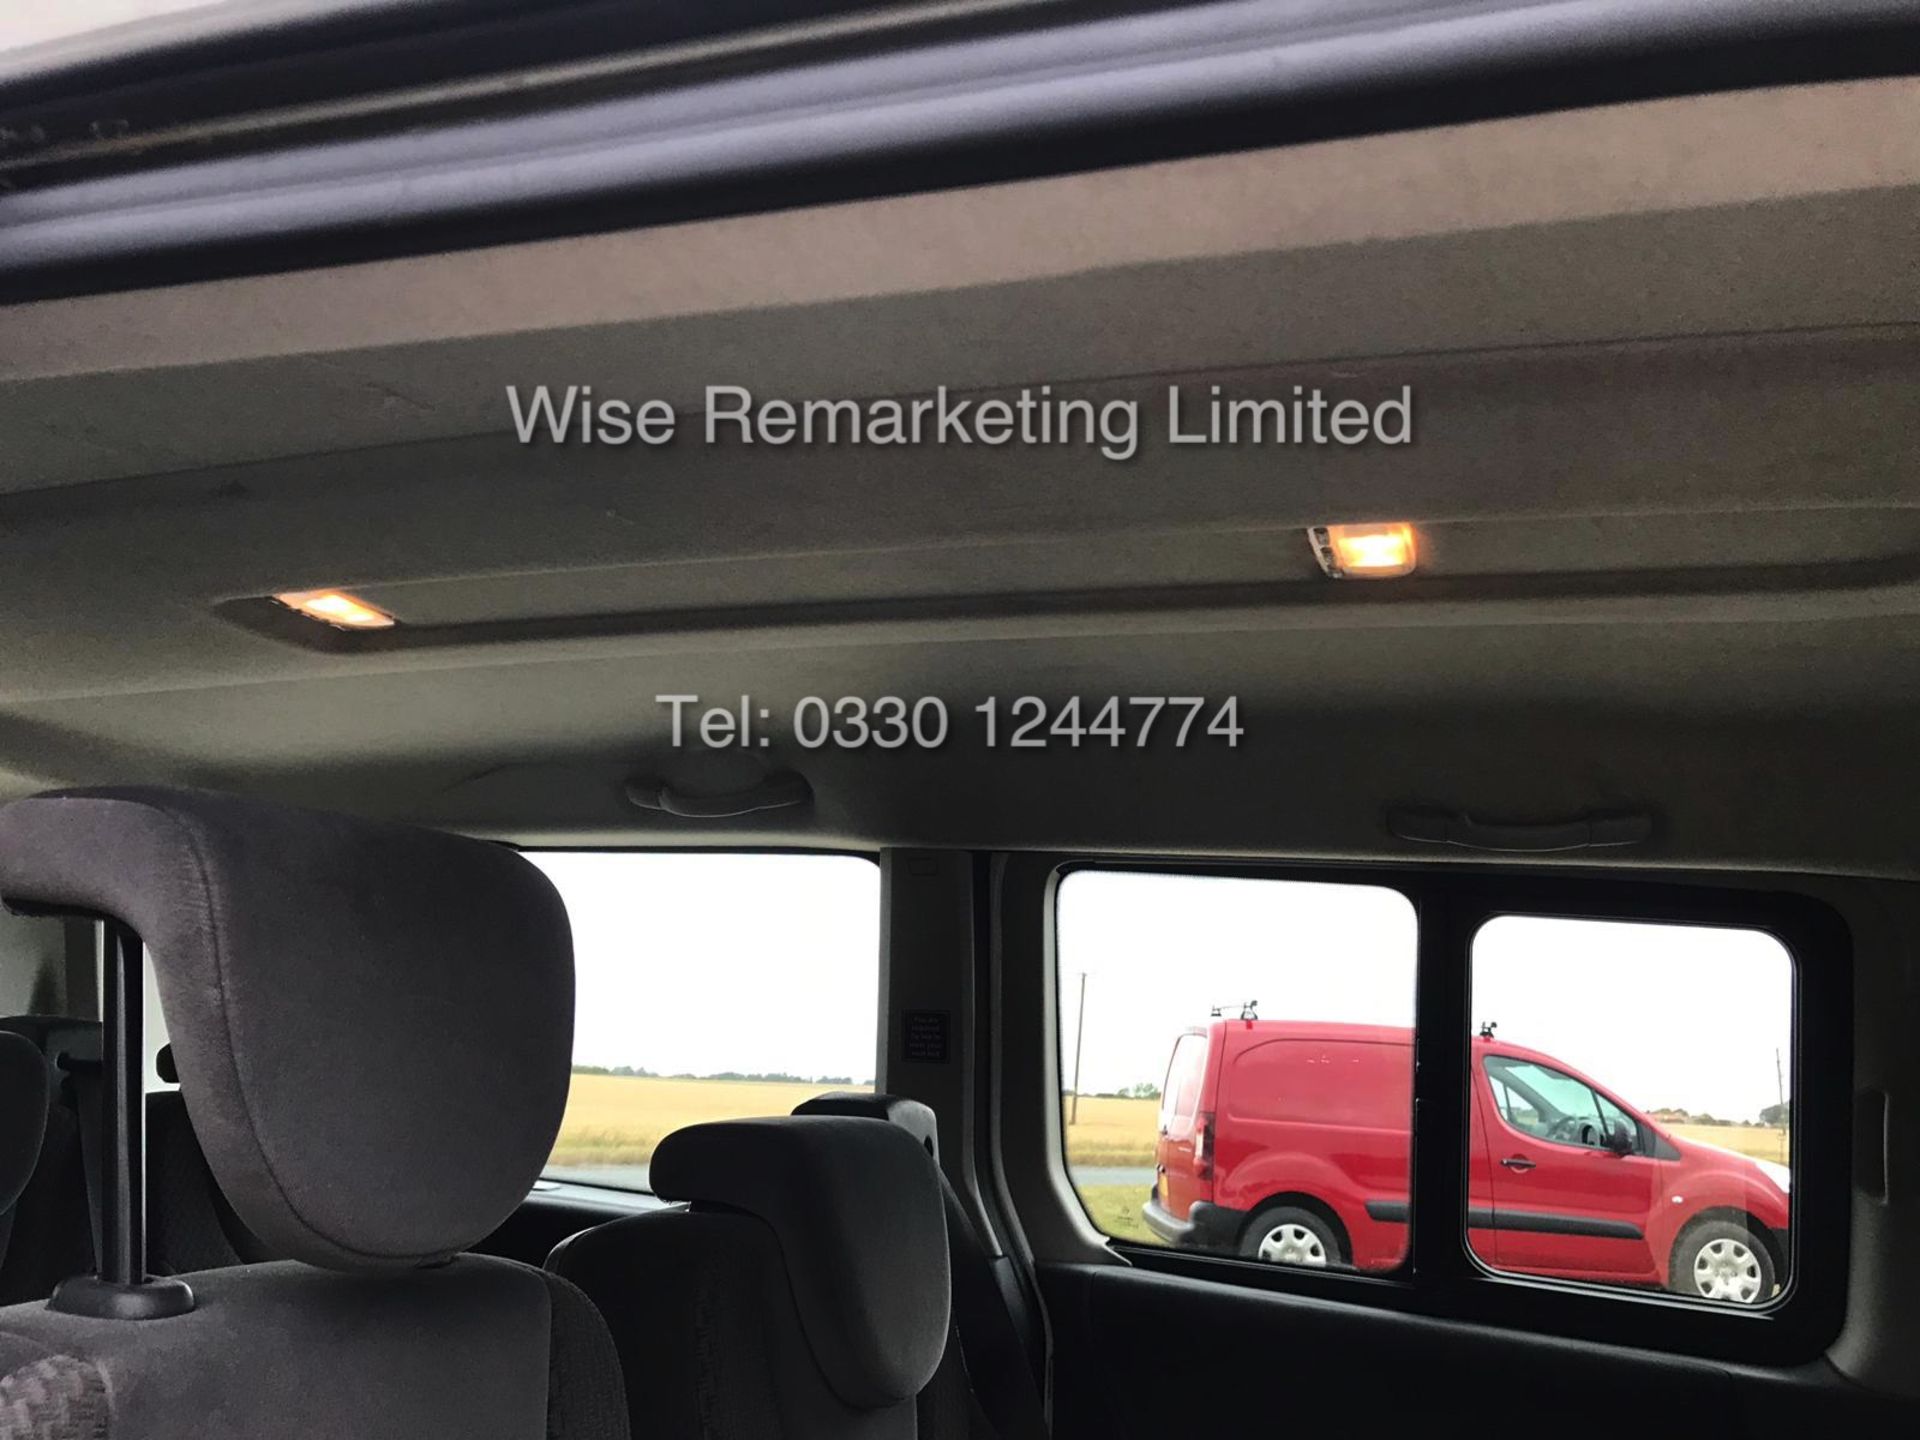 PEUGEOT EUROBUS S *MPV 8 SEATER* 2.0l (2013 - 13 REG) **AIR CON** - 1 OWNER FROM NEW - Image 8 of 19